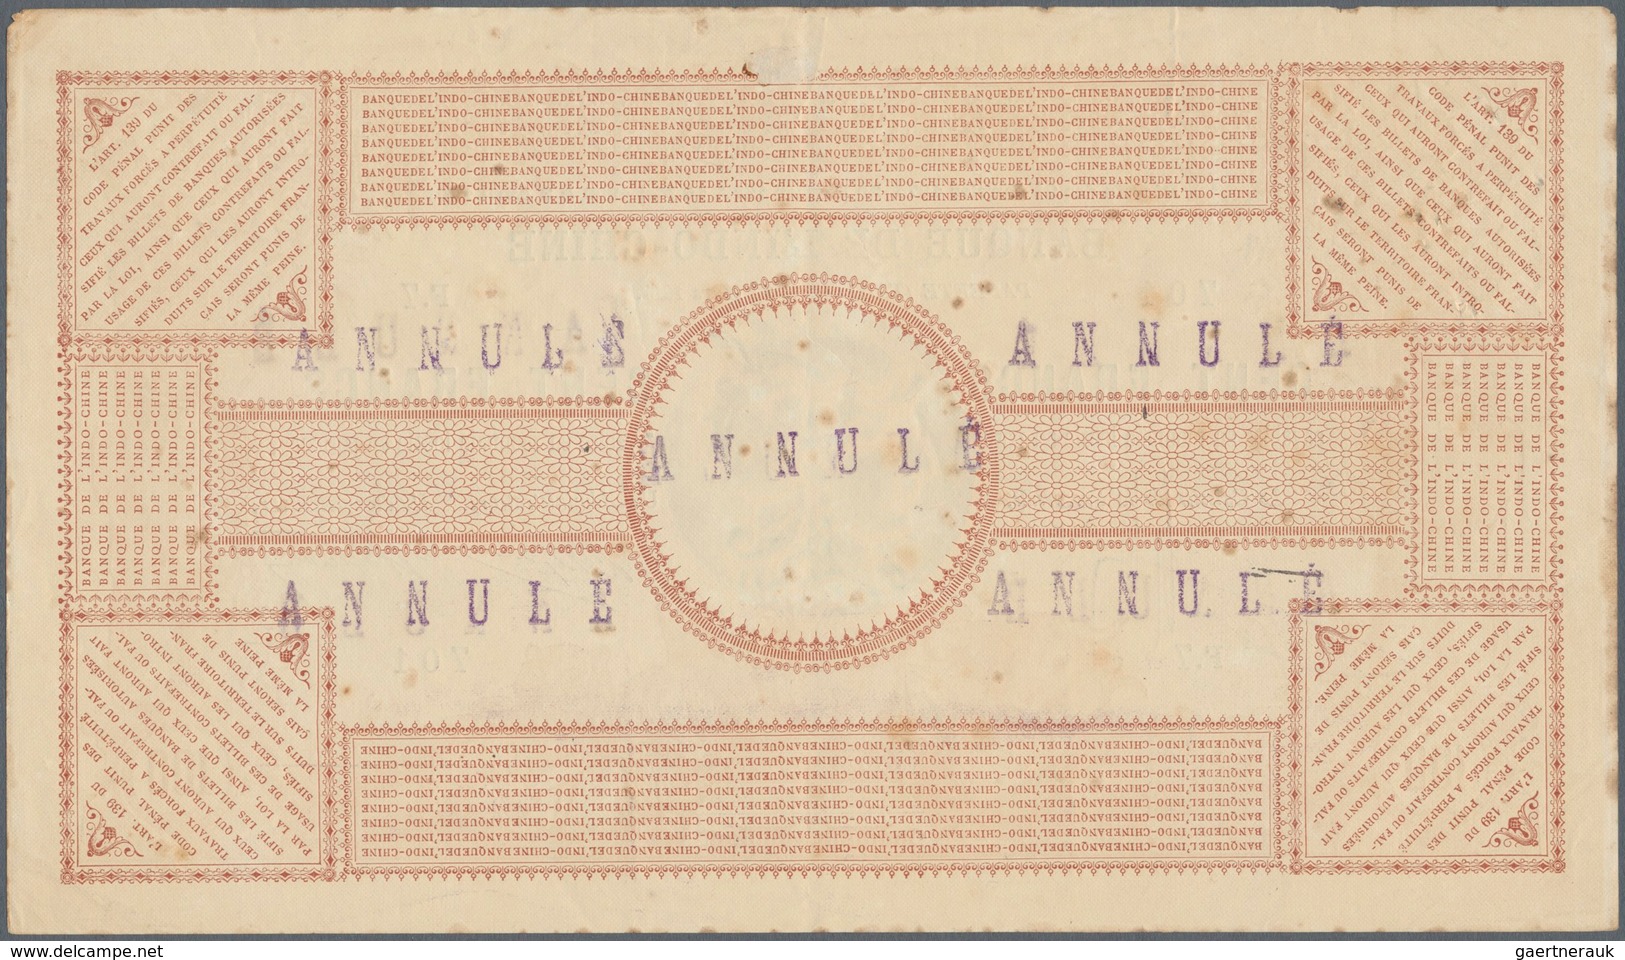 02471 Tahiti: 100 Francs 1914 With Several Smaller Stamps "Annule" P. 3, Small Stain Dots In Paper, Minor - Altri – Oceania